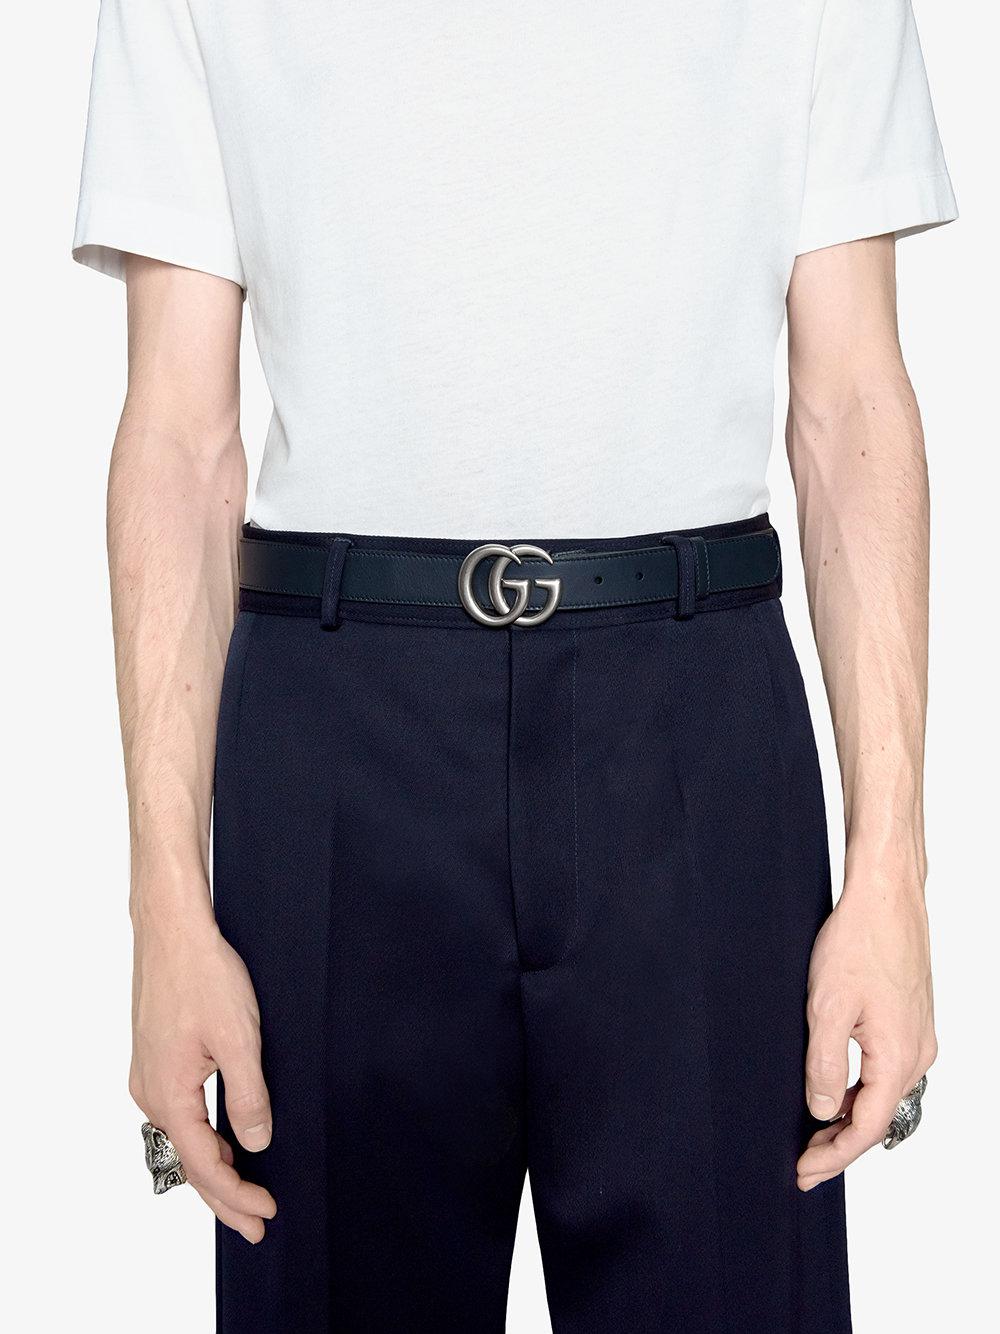 gucci belt with double g buckle